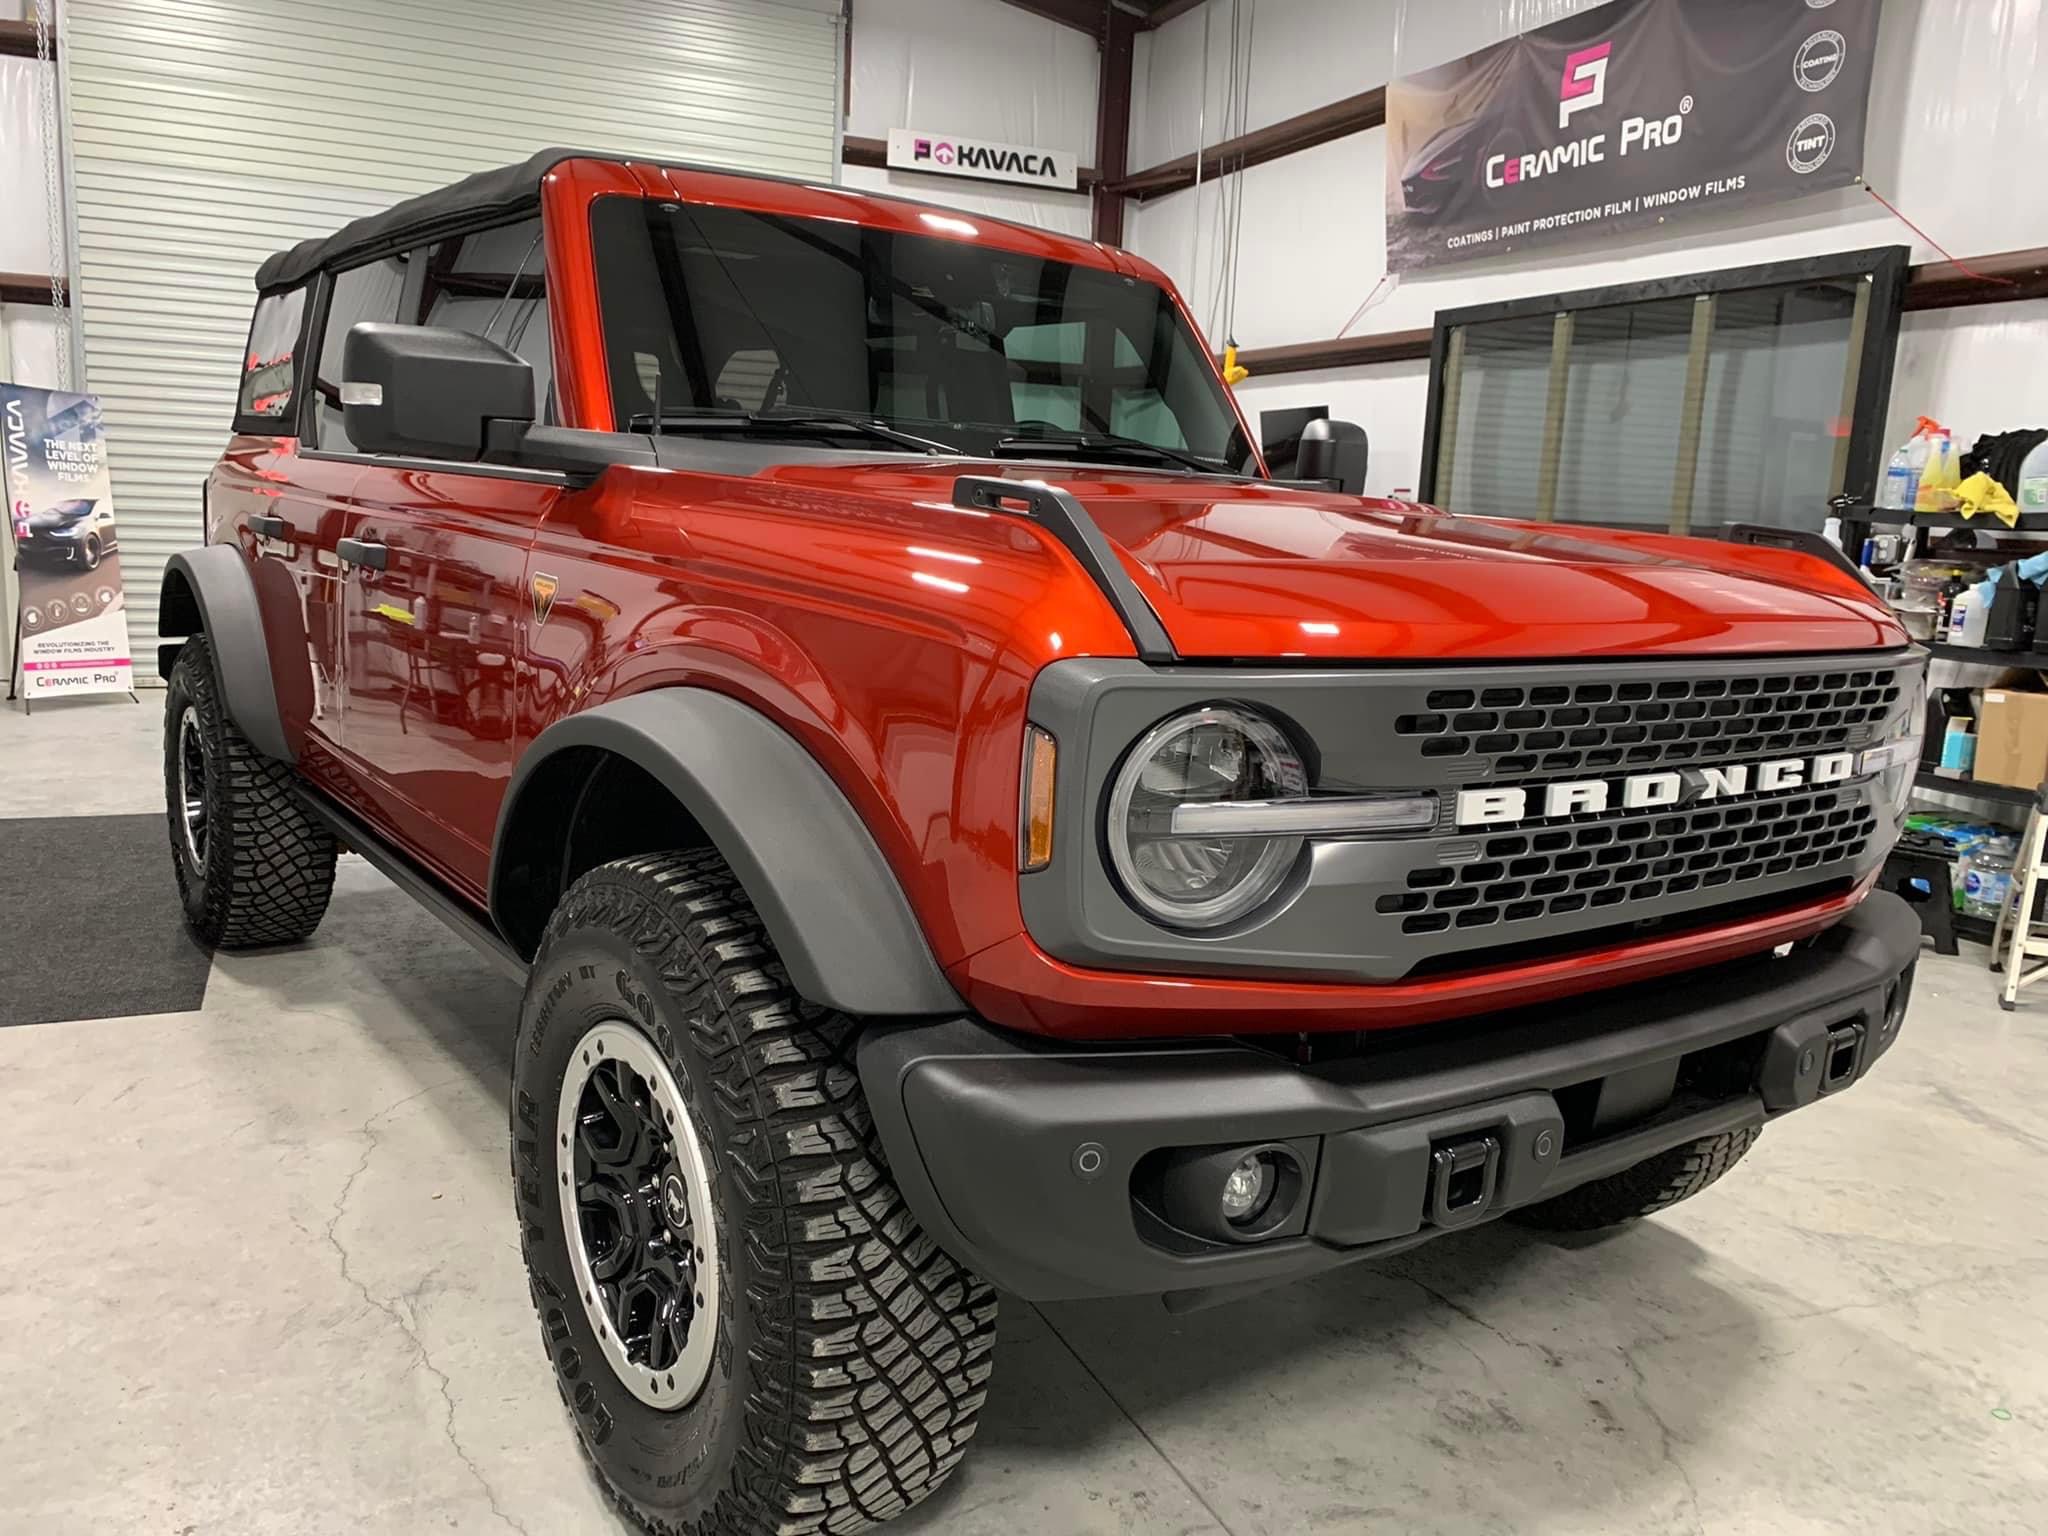 Ford Bronco HOT PEPPER RED Bronco Club BFEA692B-0130-407C-9D6A-9BE7EEDF852C